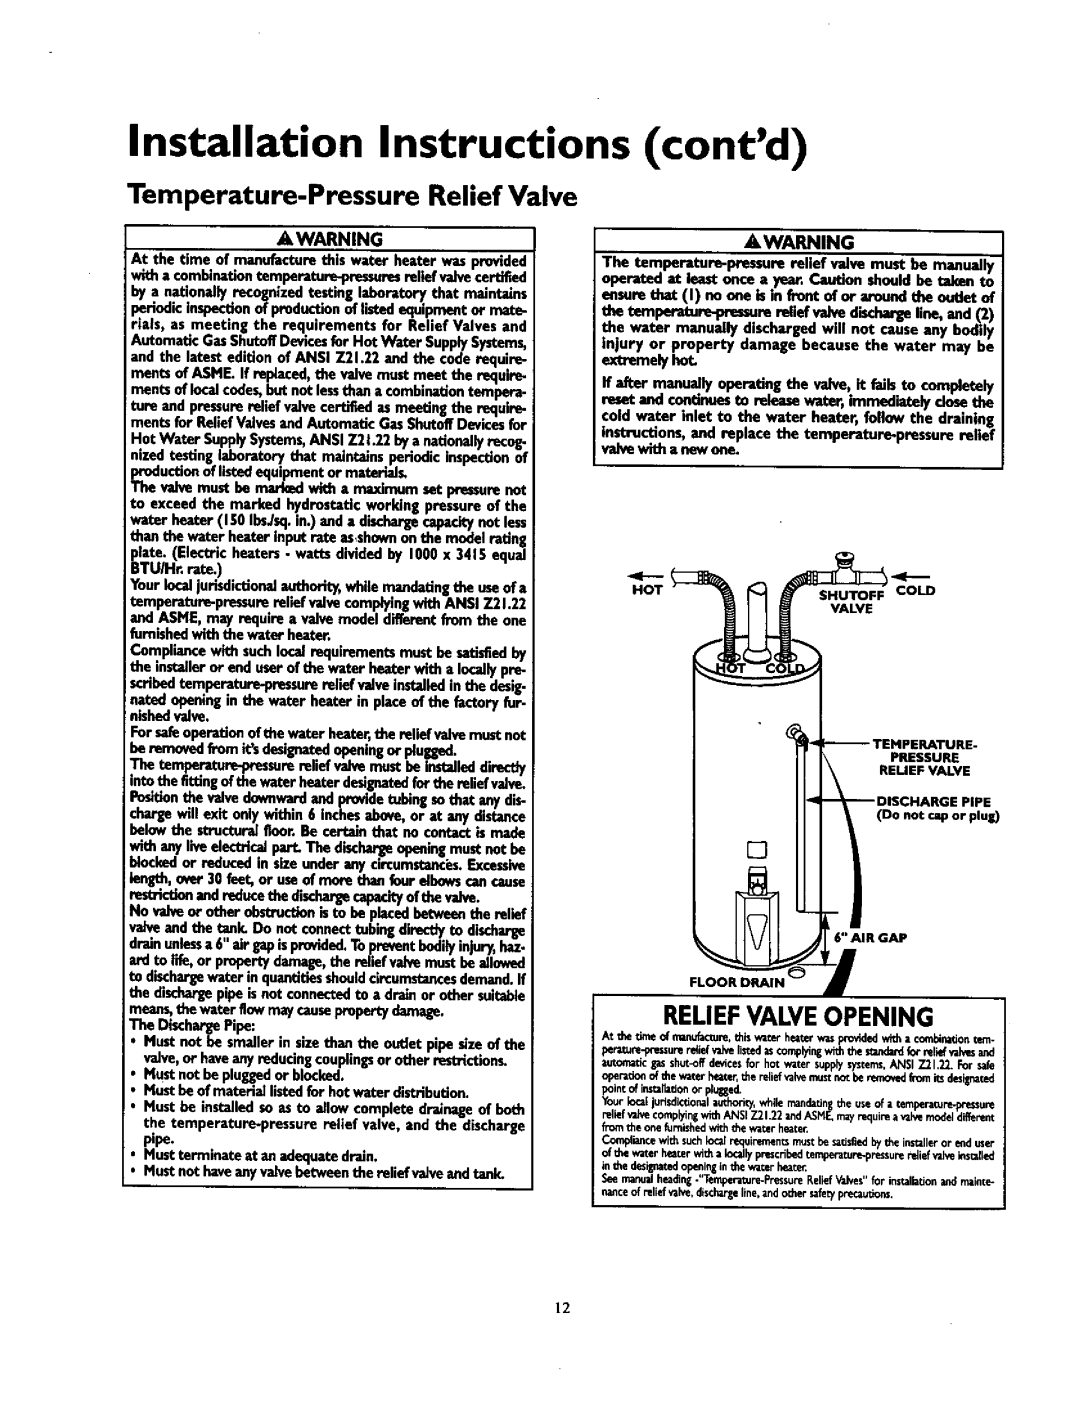 Kenmore 153.33796 Temperature-Pressure Relief Valve, A, Warning, Installation Instructions contd, Reliefvalveopening 